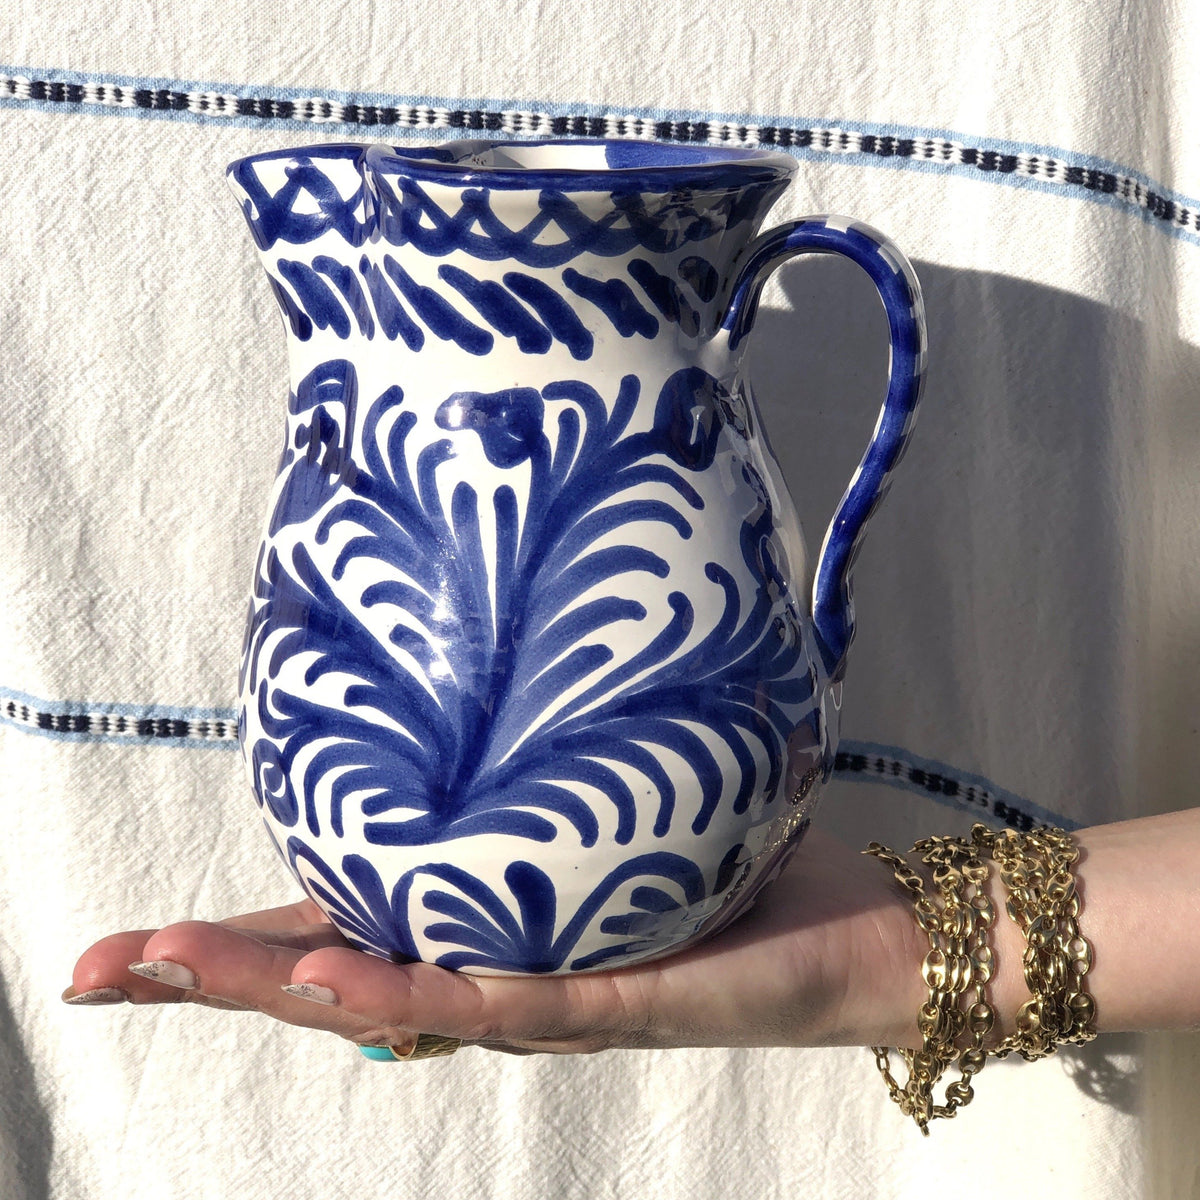 Casa Azul Small Pitcher with Hand-painted Designs